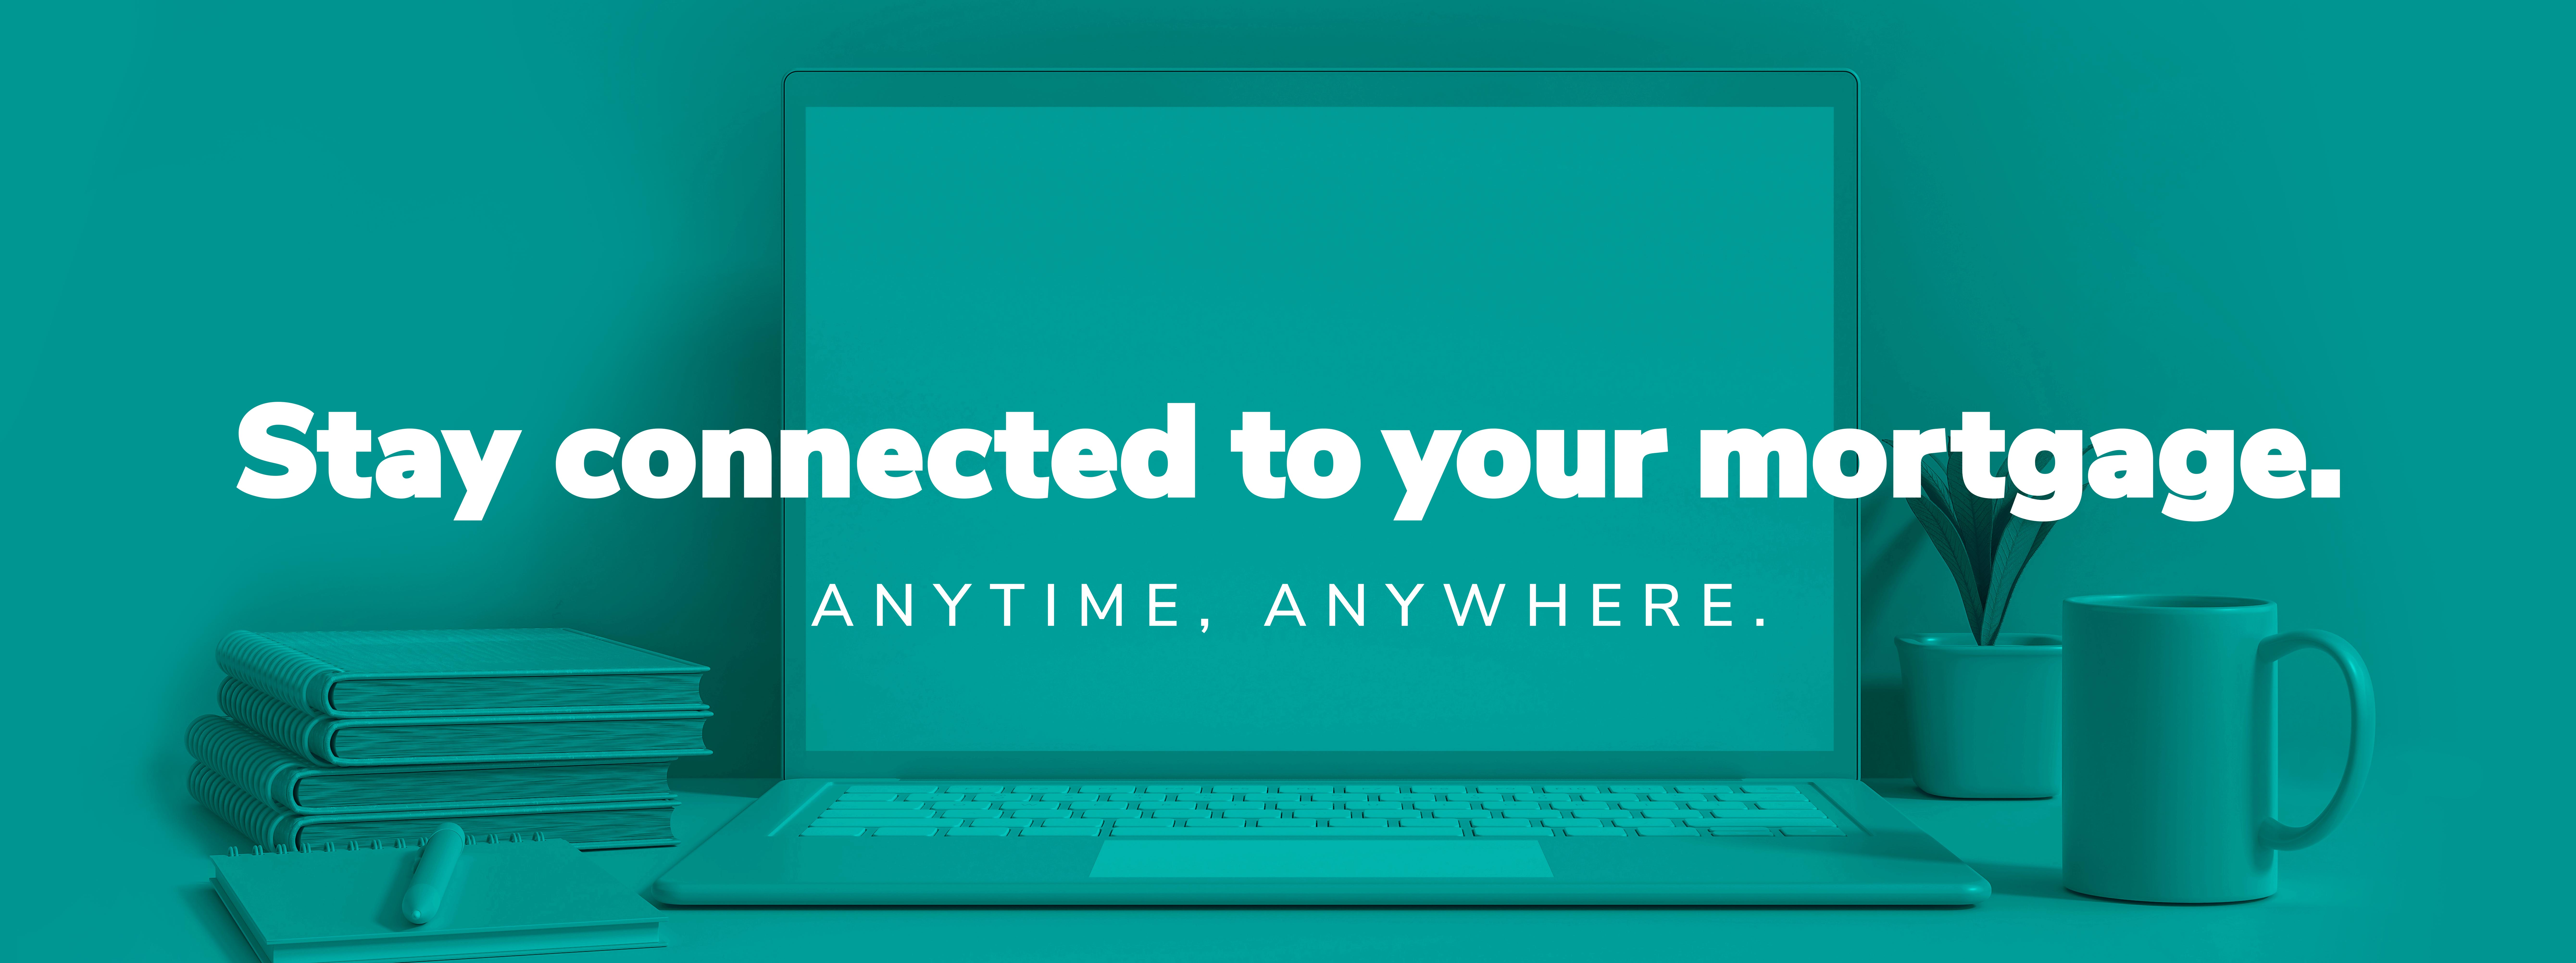 Stay connected to your mortgage. Anytime, anywhere.